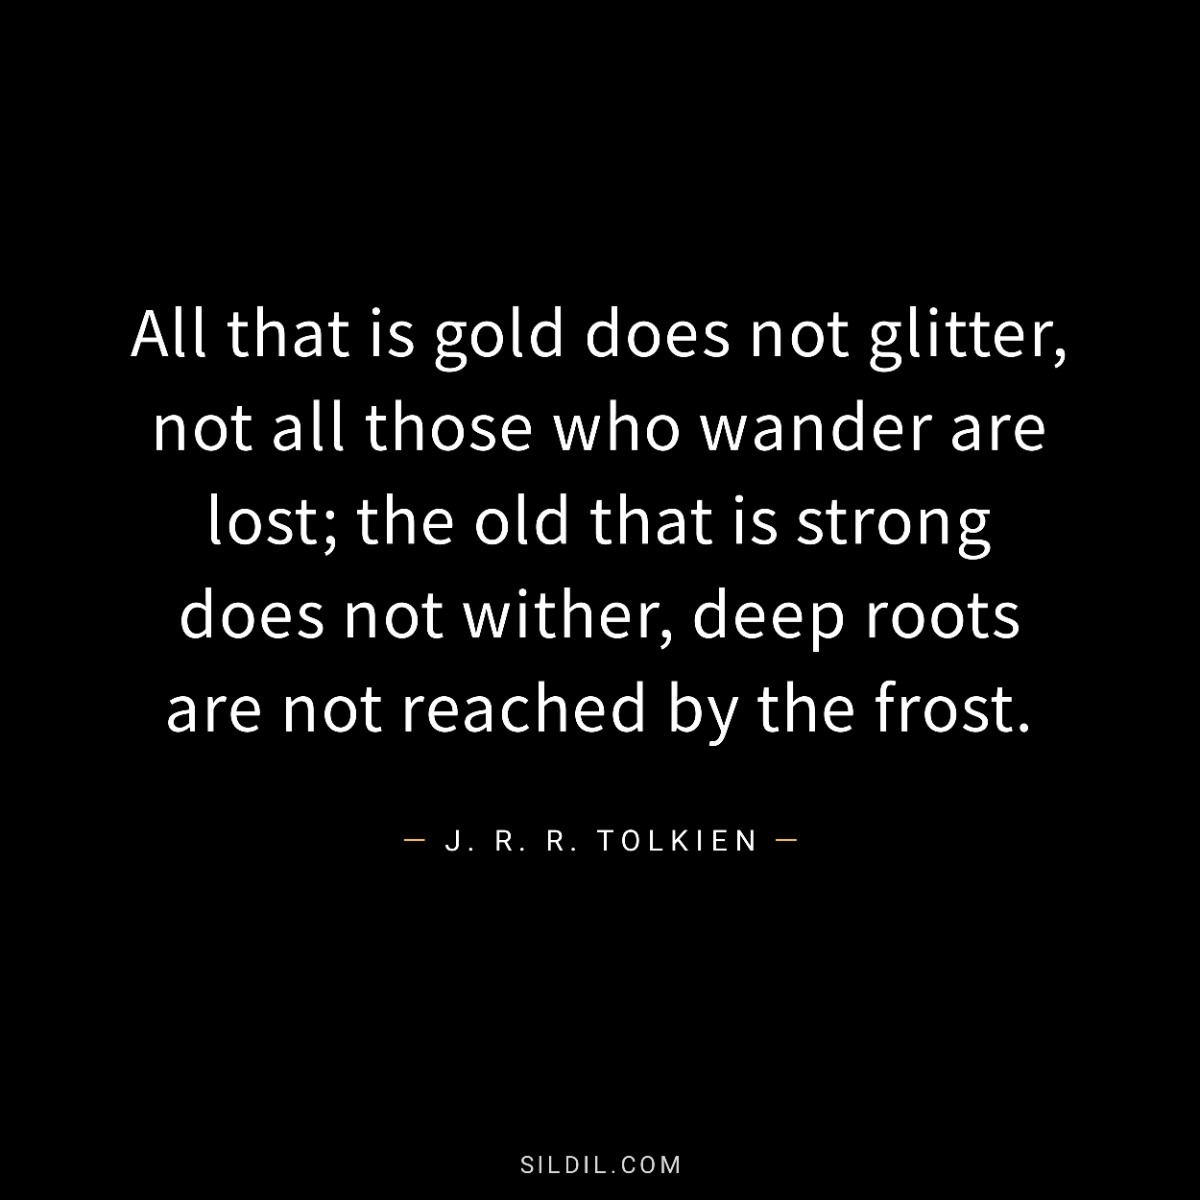 All that is gold does not glitter, not all those who wander are lost; the old that is strong does not wither, deep roots are not reached by the frost.